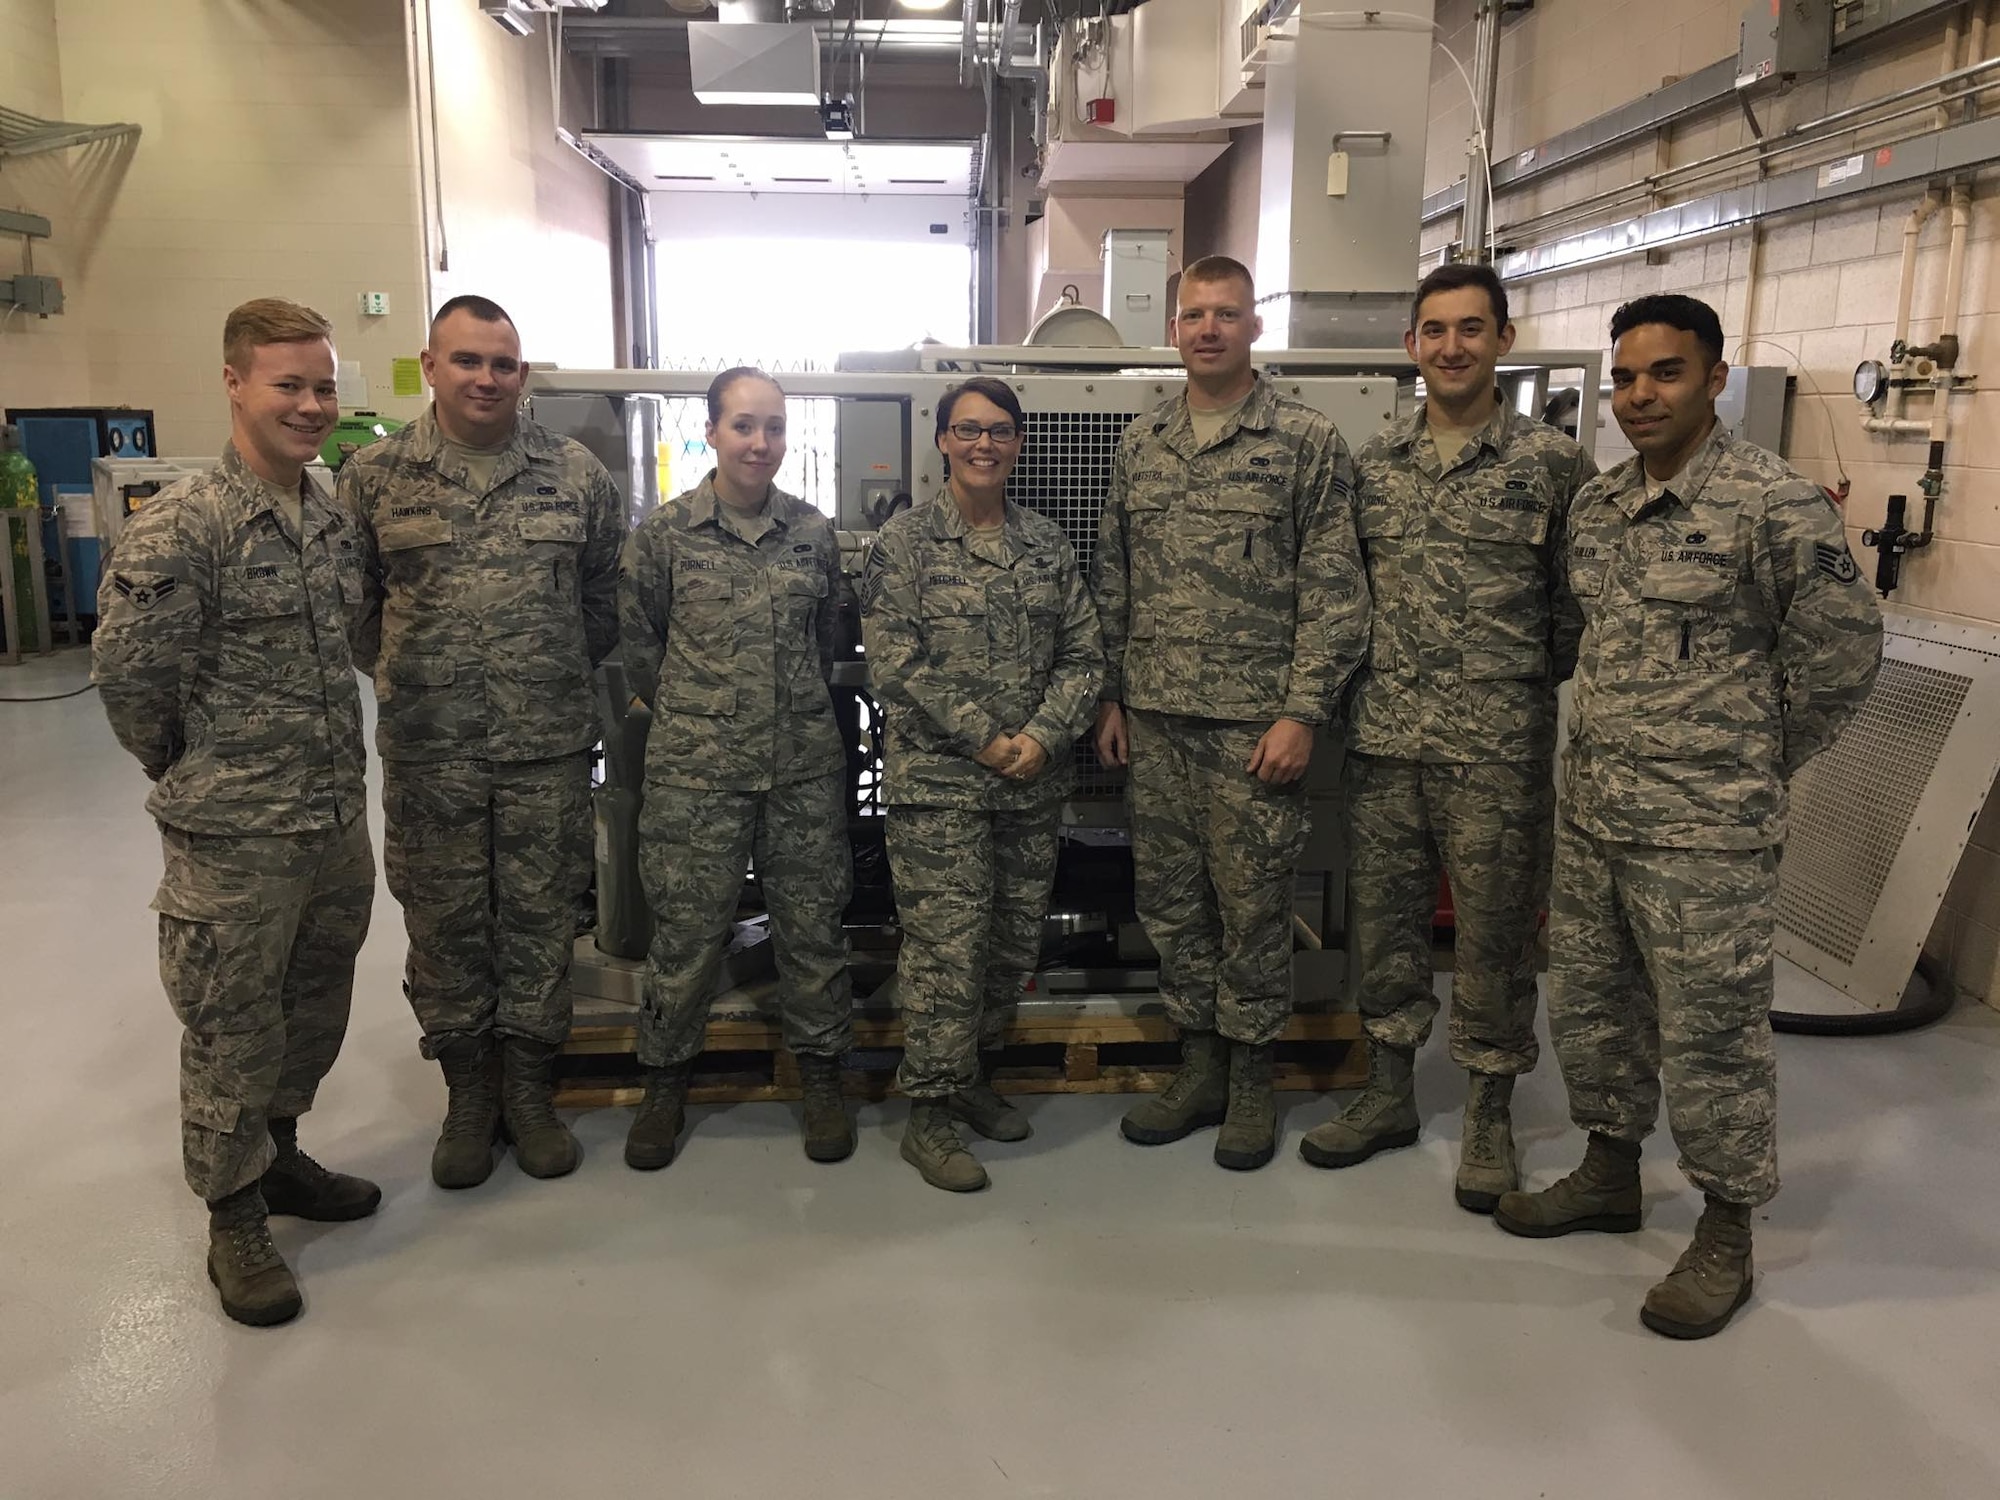 Chief Master Sgt. Amber Mitchell, 341st Missile Wing command chief, center, poses for a photo with Airmen from the 341st Maintenance Group at Malmstrom Air Force Base, Mont. Mitchell’s leadership style is all about transparency – ensuring every Airman is operating on the same playing field and that she is truly engaging with Airmen. (Courtesy photo)